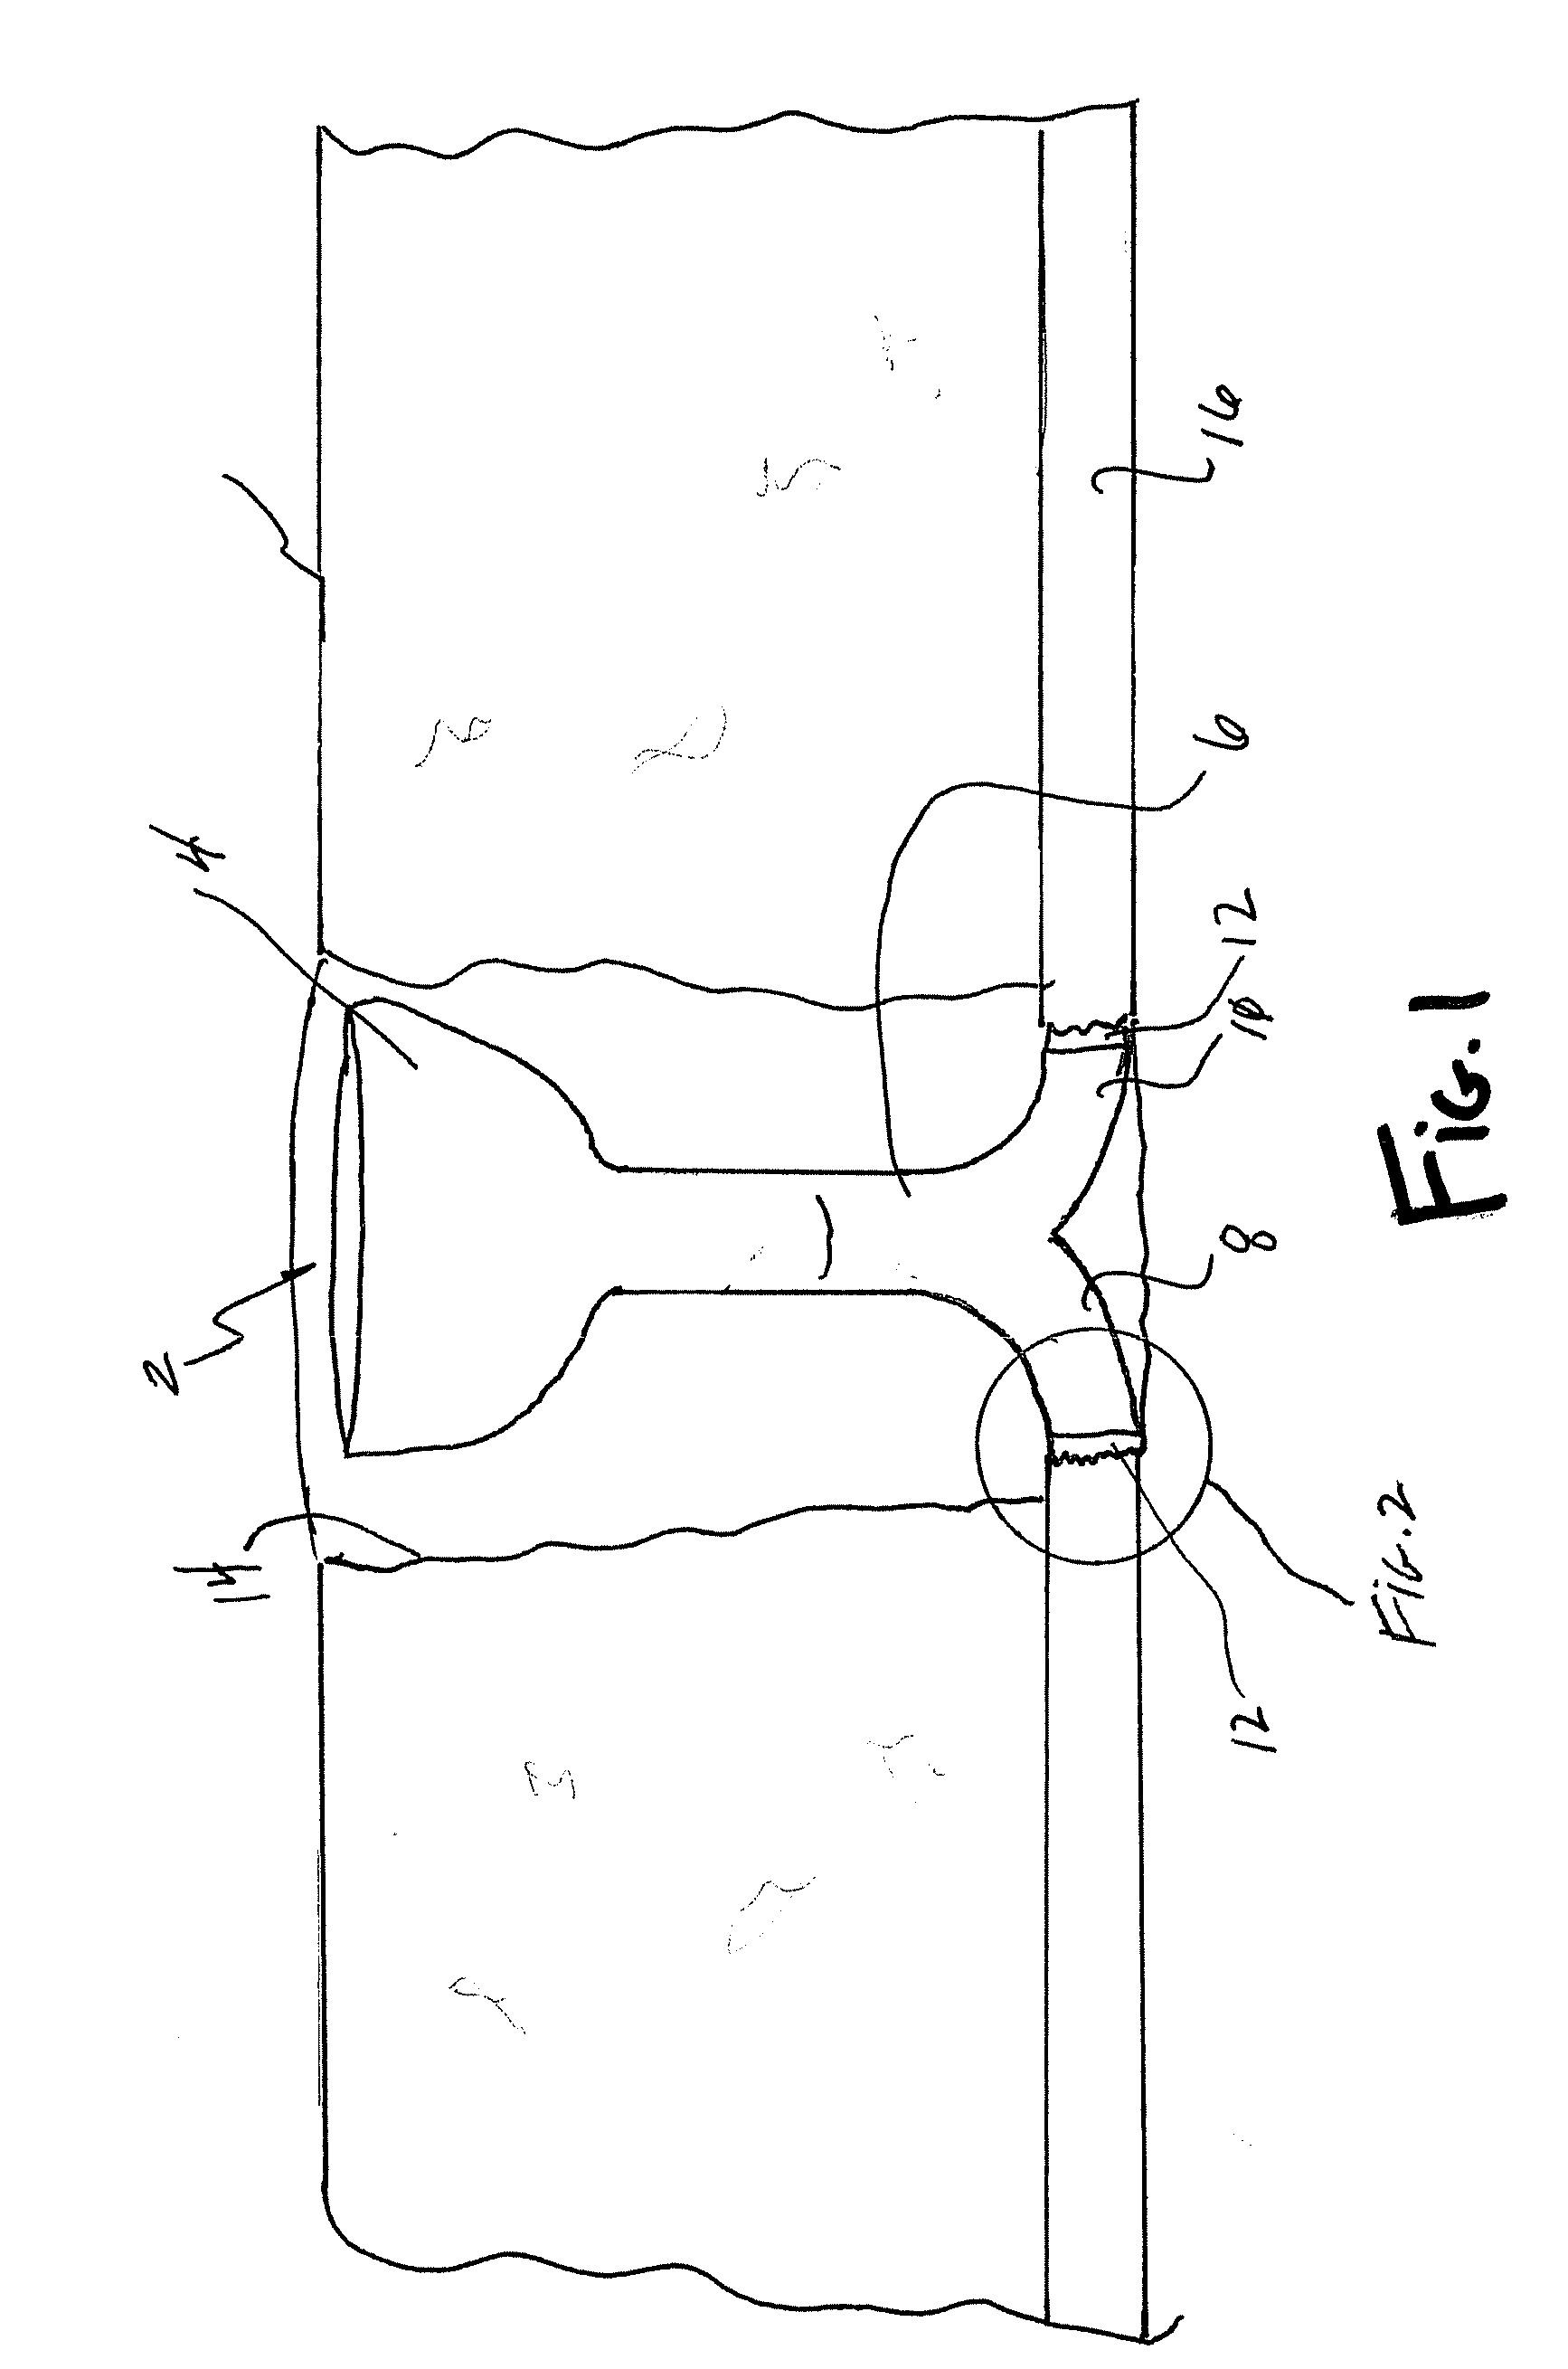 Trenchless lining device and method for performing multi-directional conduit lining